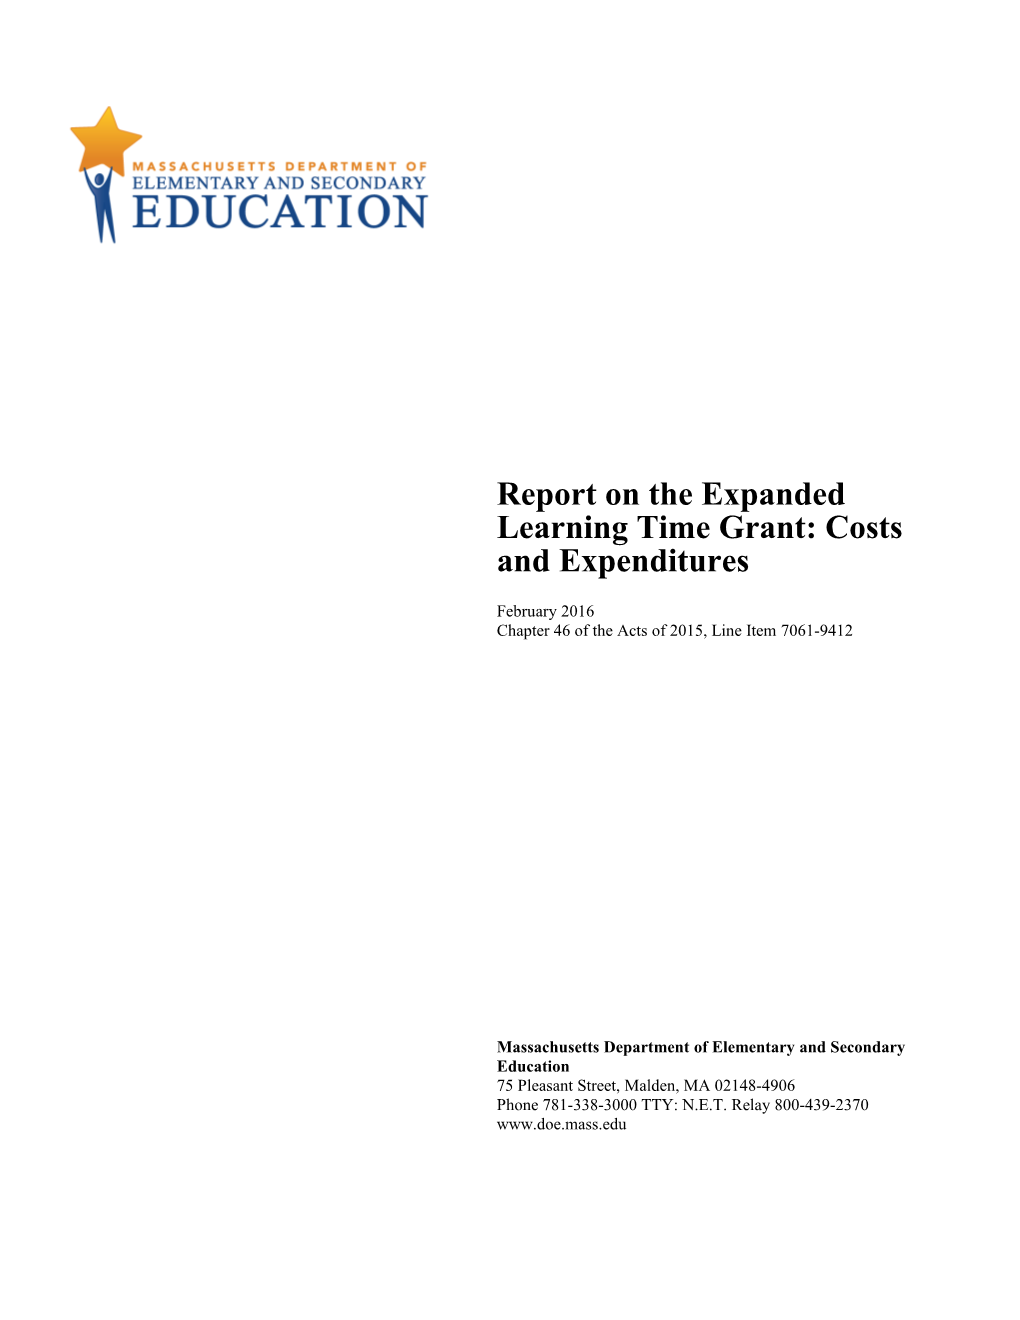 Report on the Expanded Learning Time Grant: Costs and Expenditures